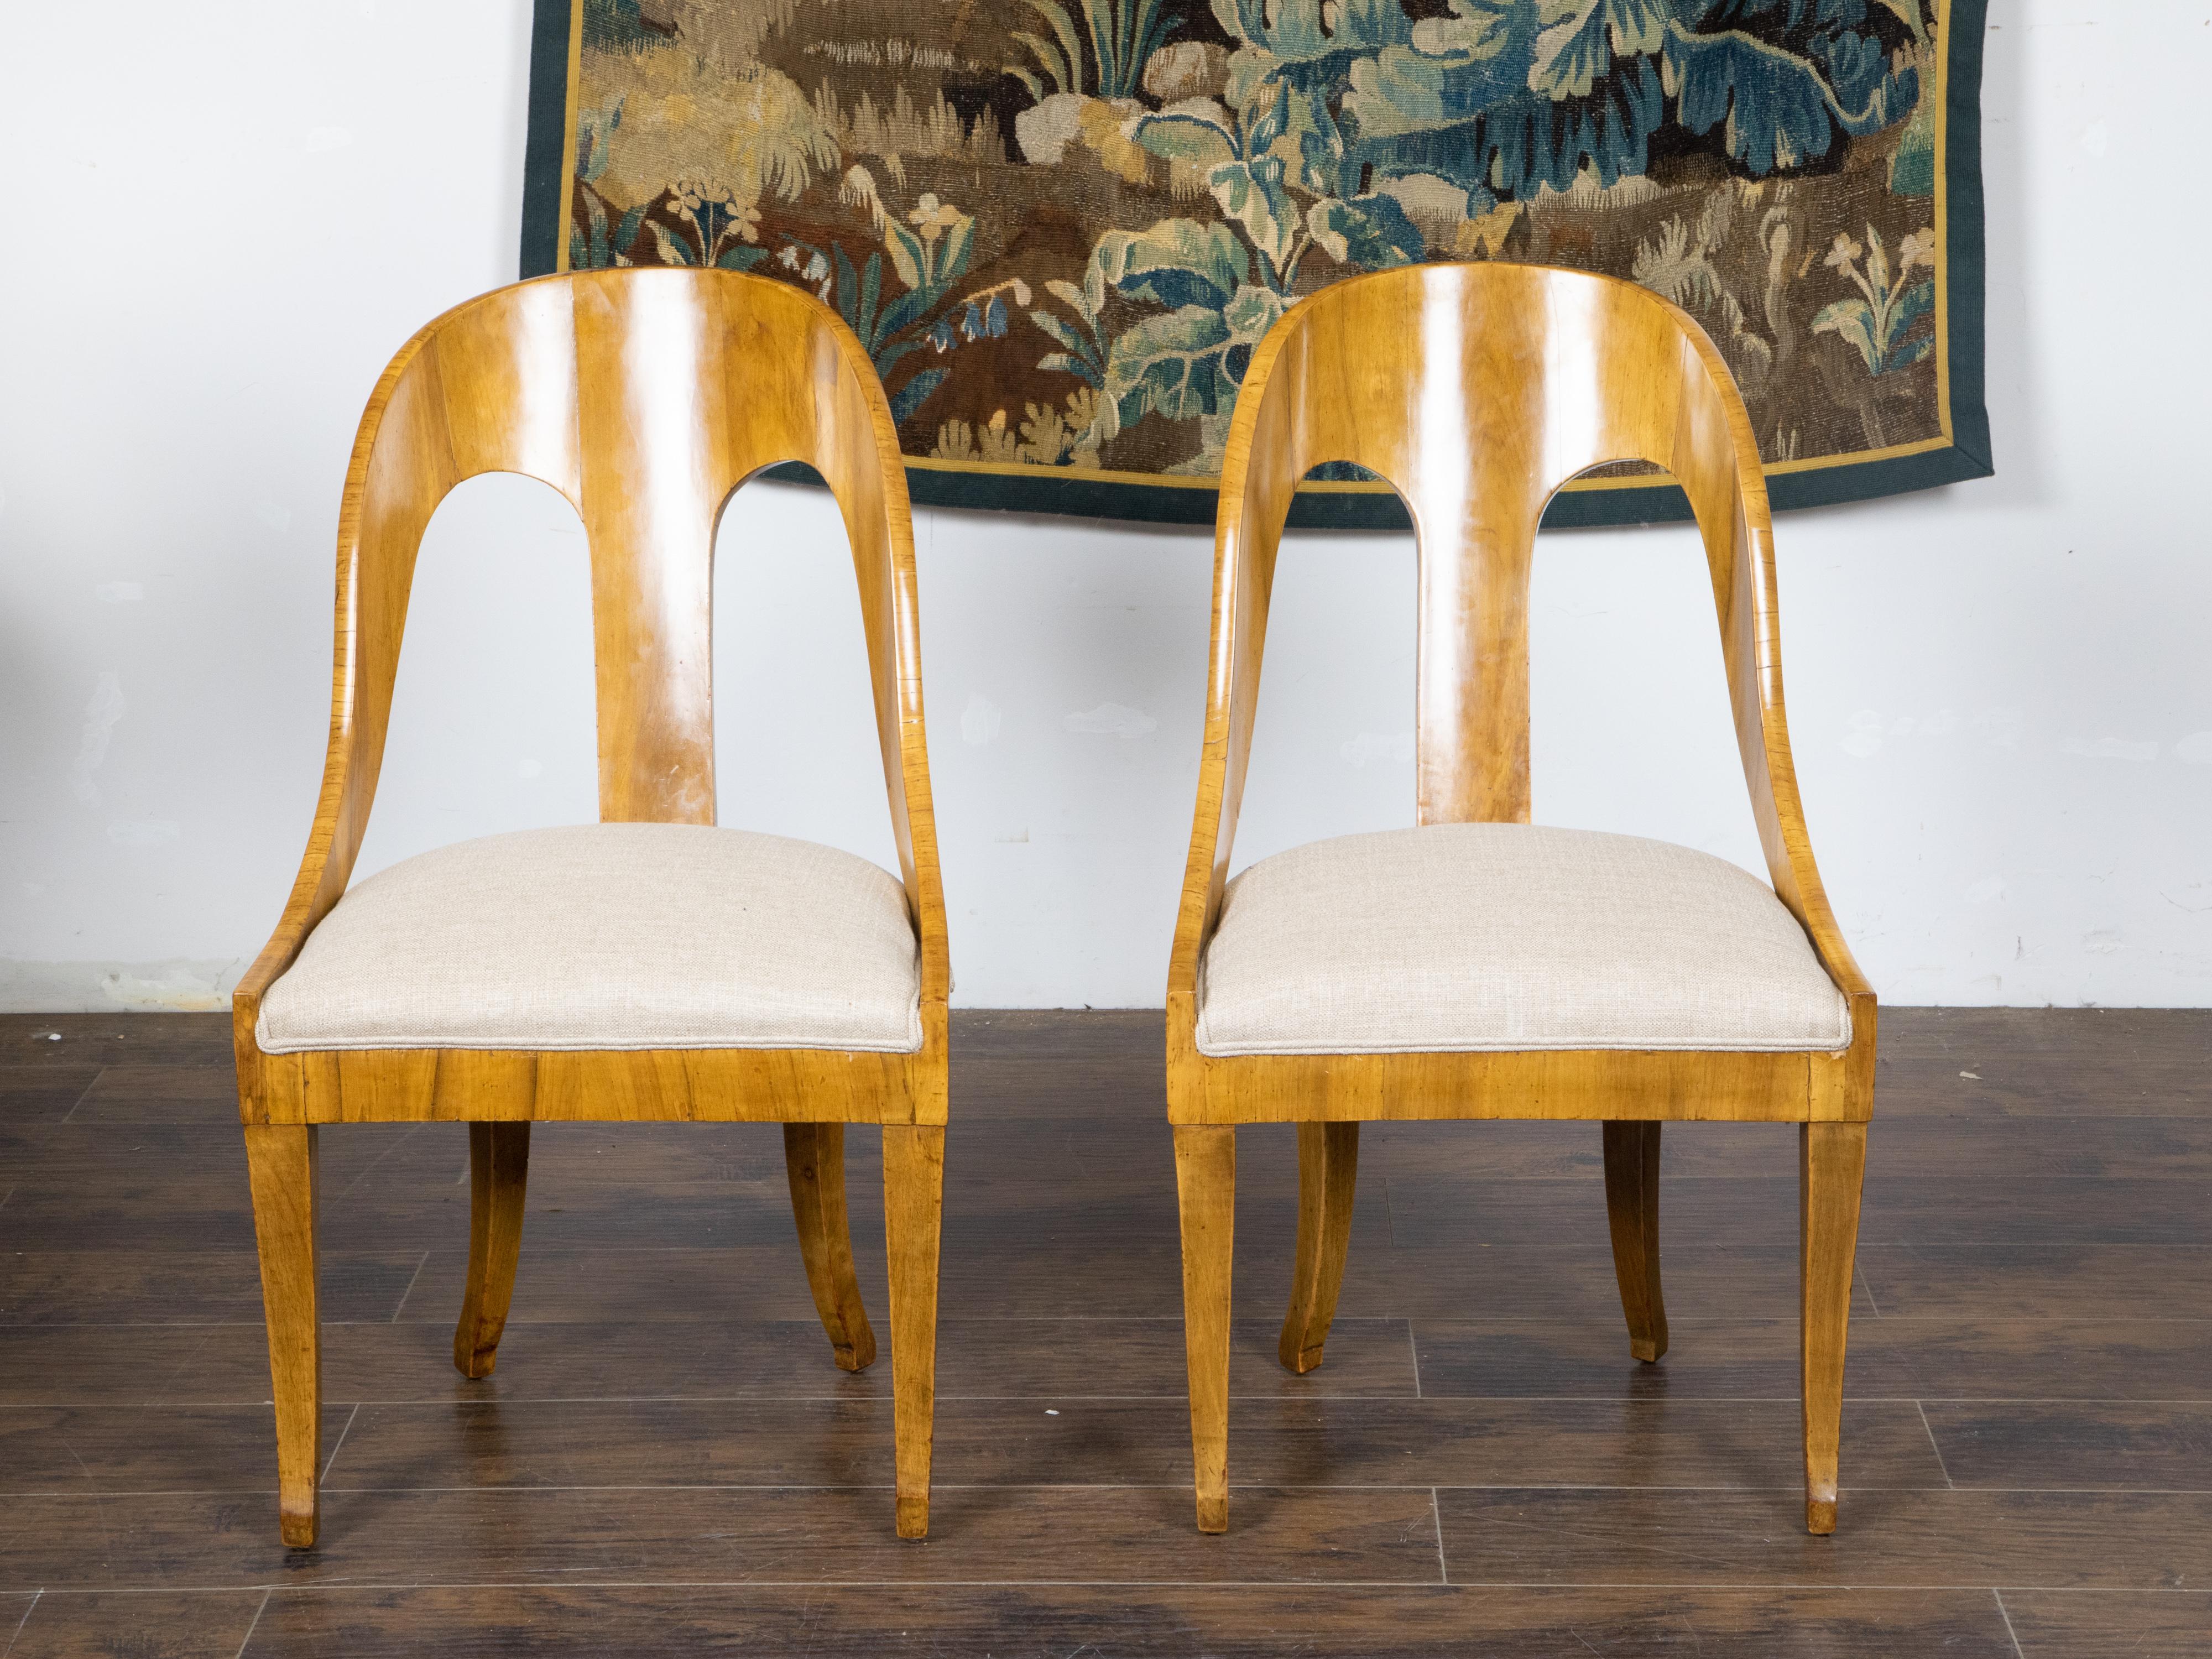 A pair of Biedermeier style walnut spoon back chairs from the early 20th century with curving backs, saber legs and new linen upholstery. Created during the Turn of the Century, this pair of walnut spoon back chairs showcases the stylistic